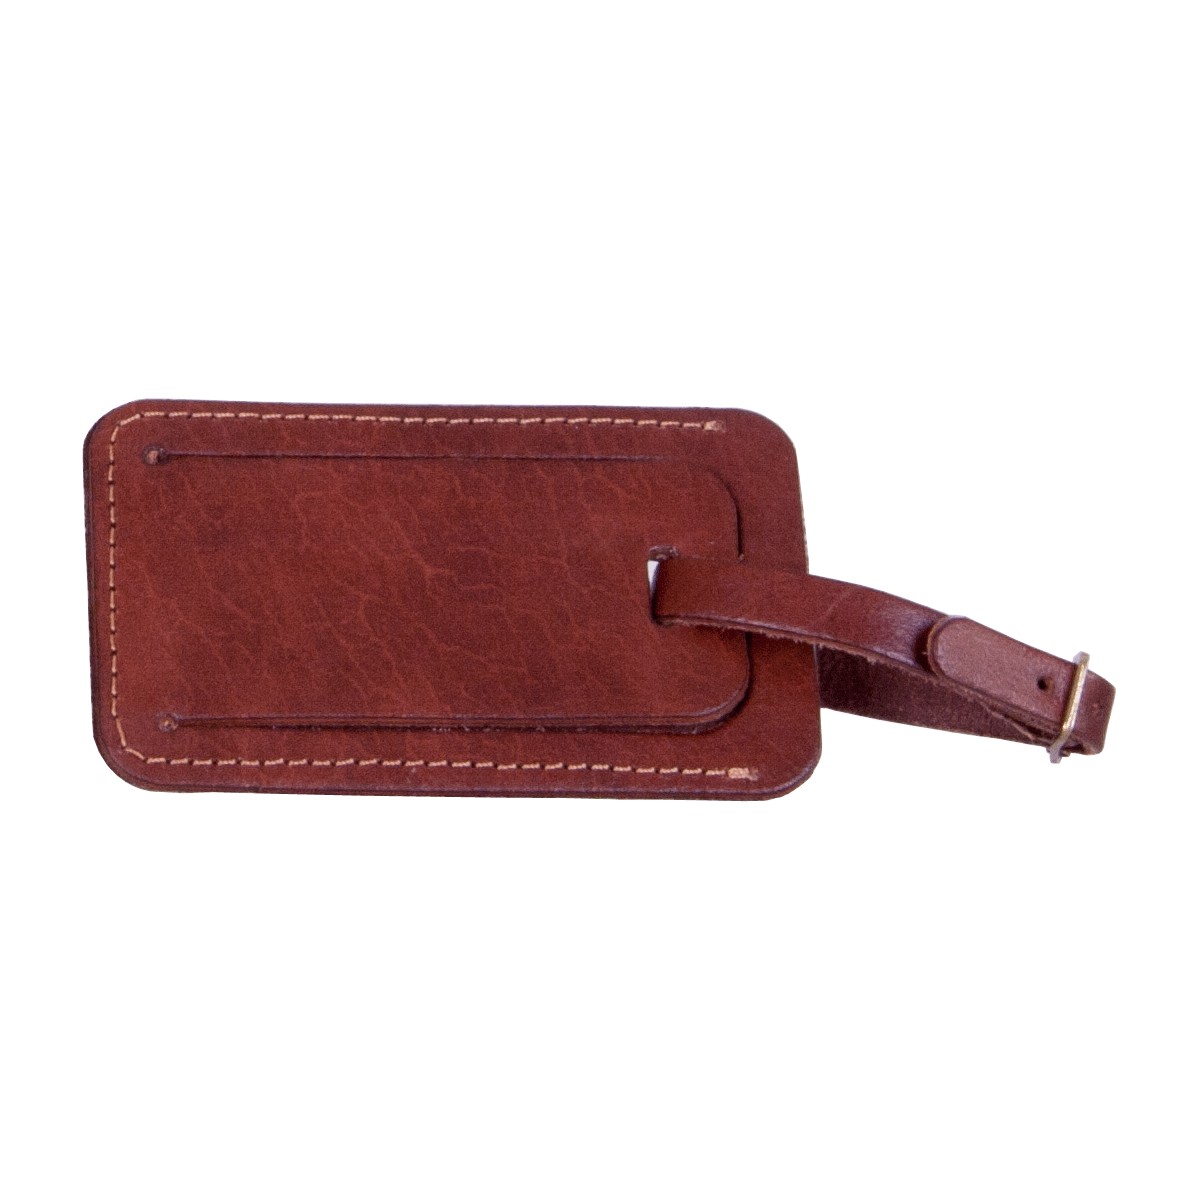 Leather Luggage Tag Mid Brown, part of the Luxury Leather Travel Set